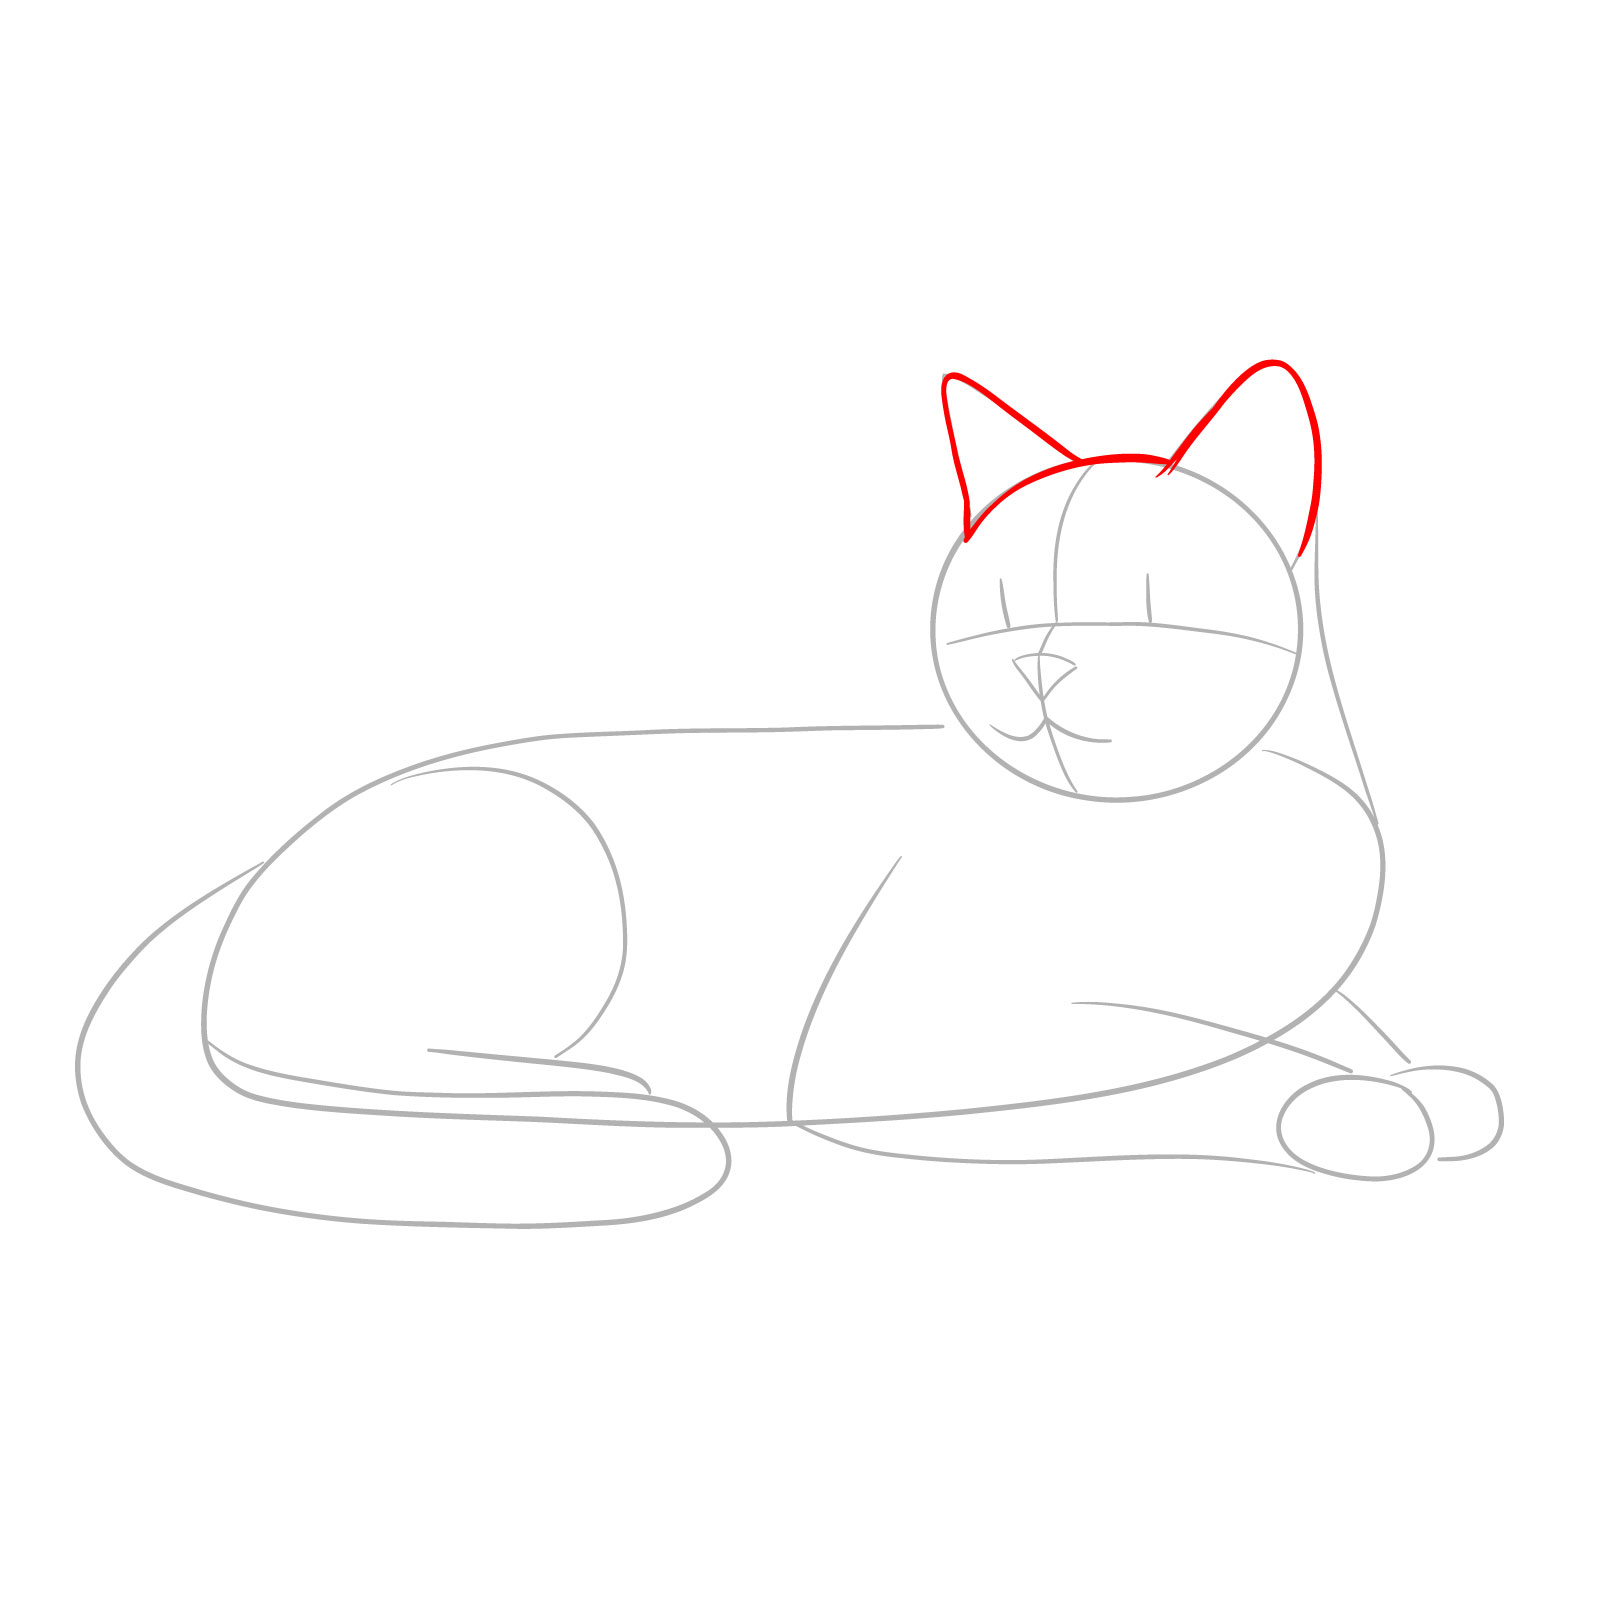 Shaping the ears and top of the head for a side-view lying cat illustration - step 03